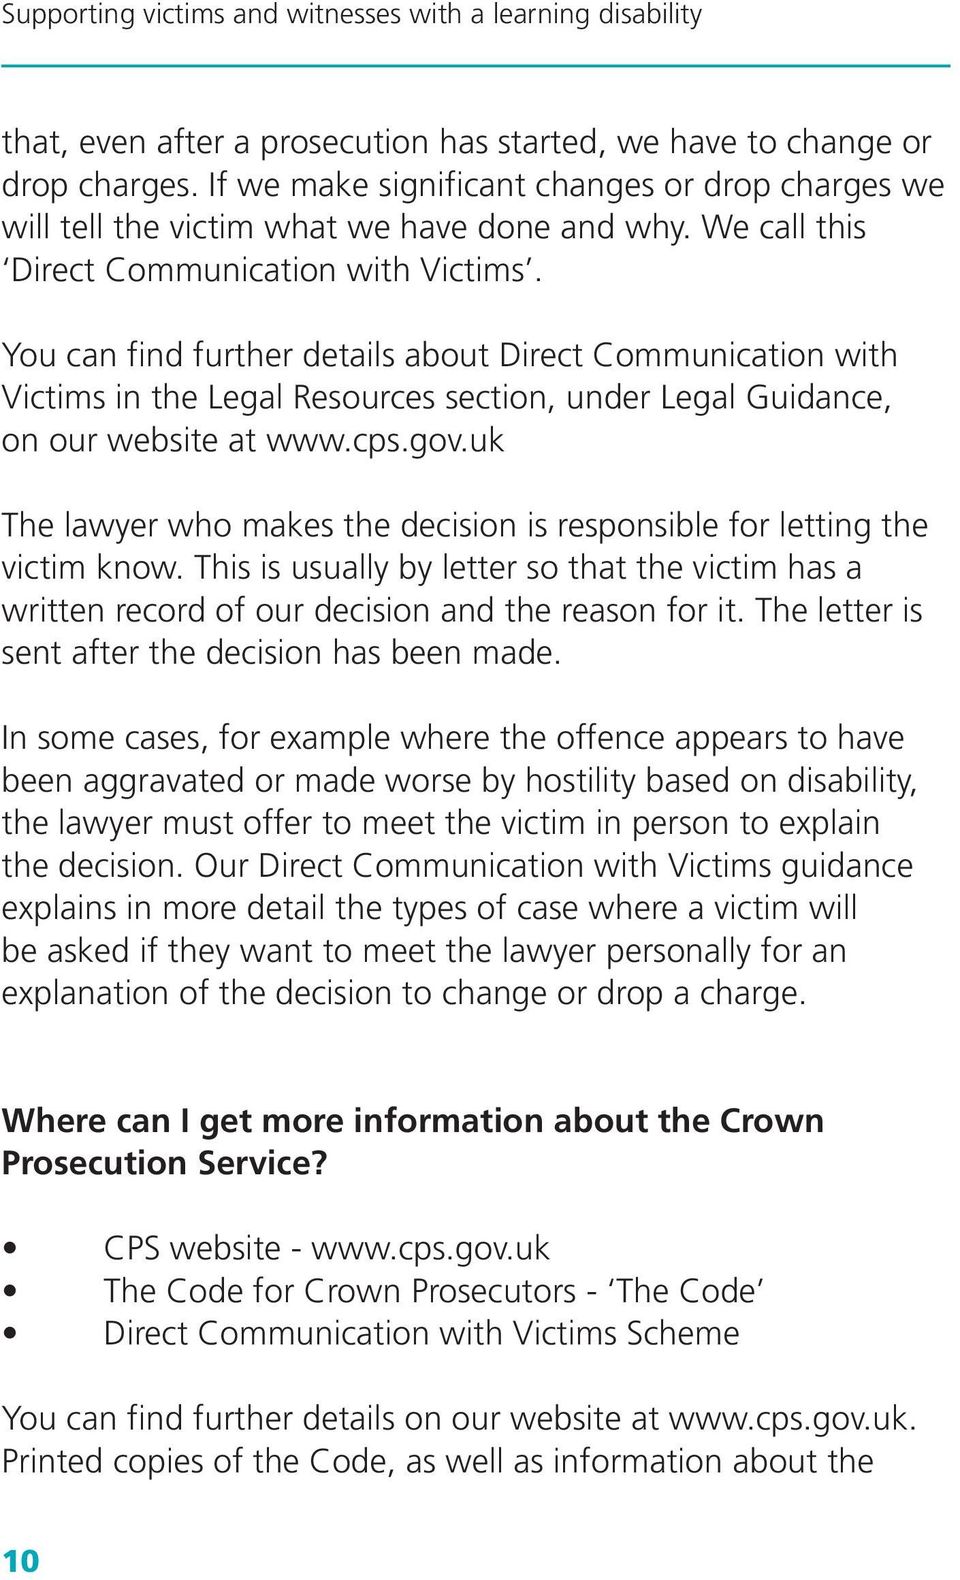 gov.uk The lawyer who makes the decision is responsible for letting the victim know. This is usually by letter so that the victim has a written record of our decision and the reason for it.